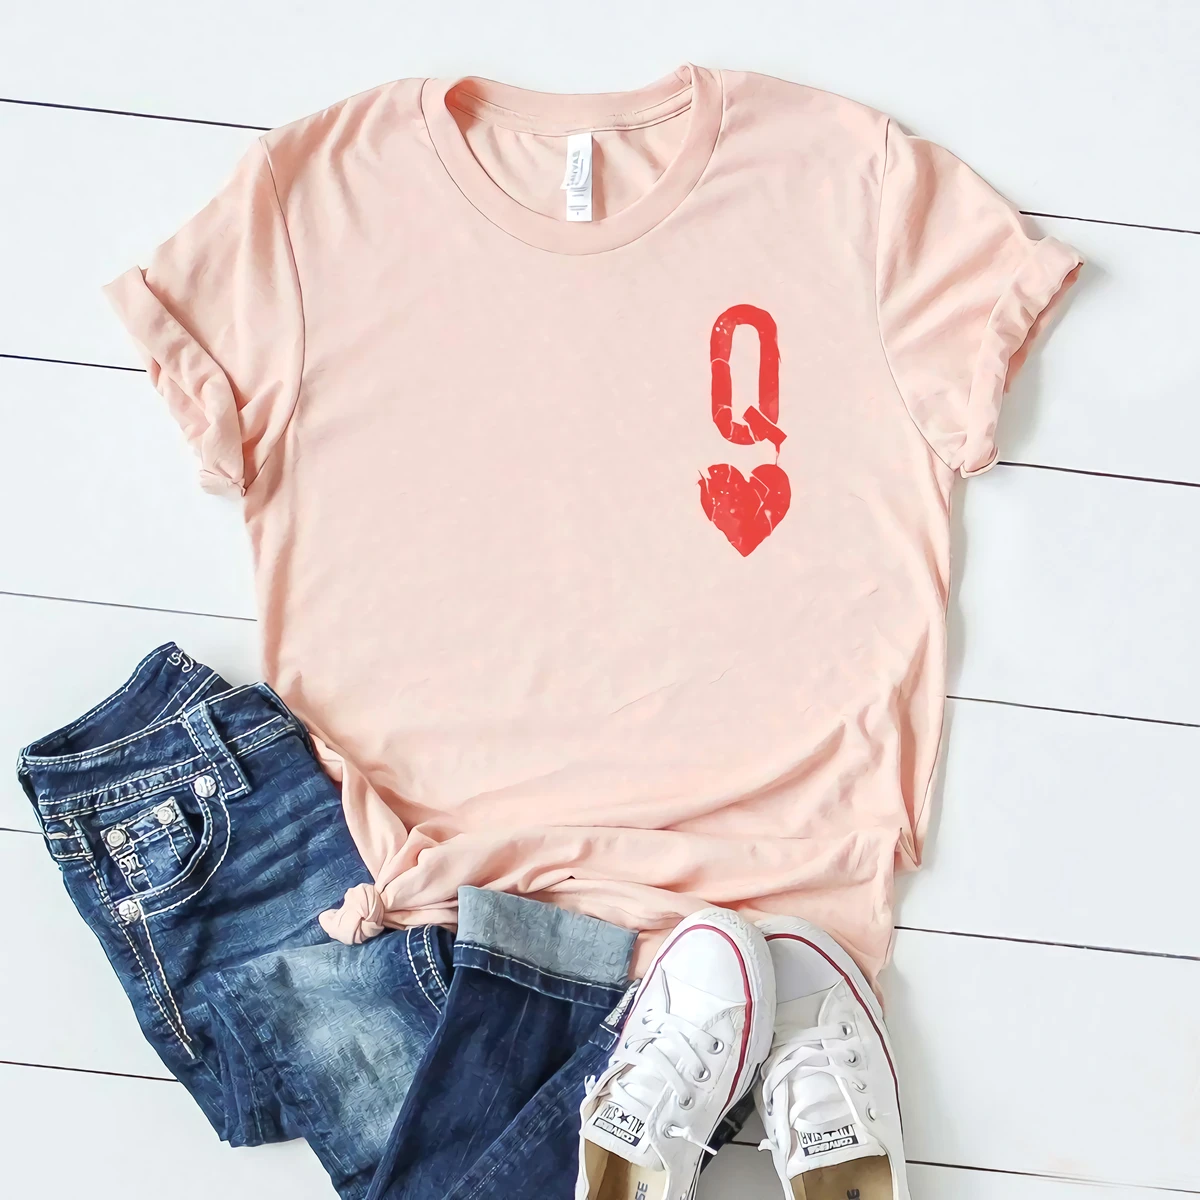 

2023 Queen of Hearts T-shirt Girls Cute Queen Tee Tumblr Poker Cards Q Graphic Tees Alice in The Wonderland Shirt